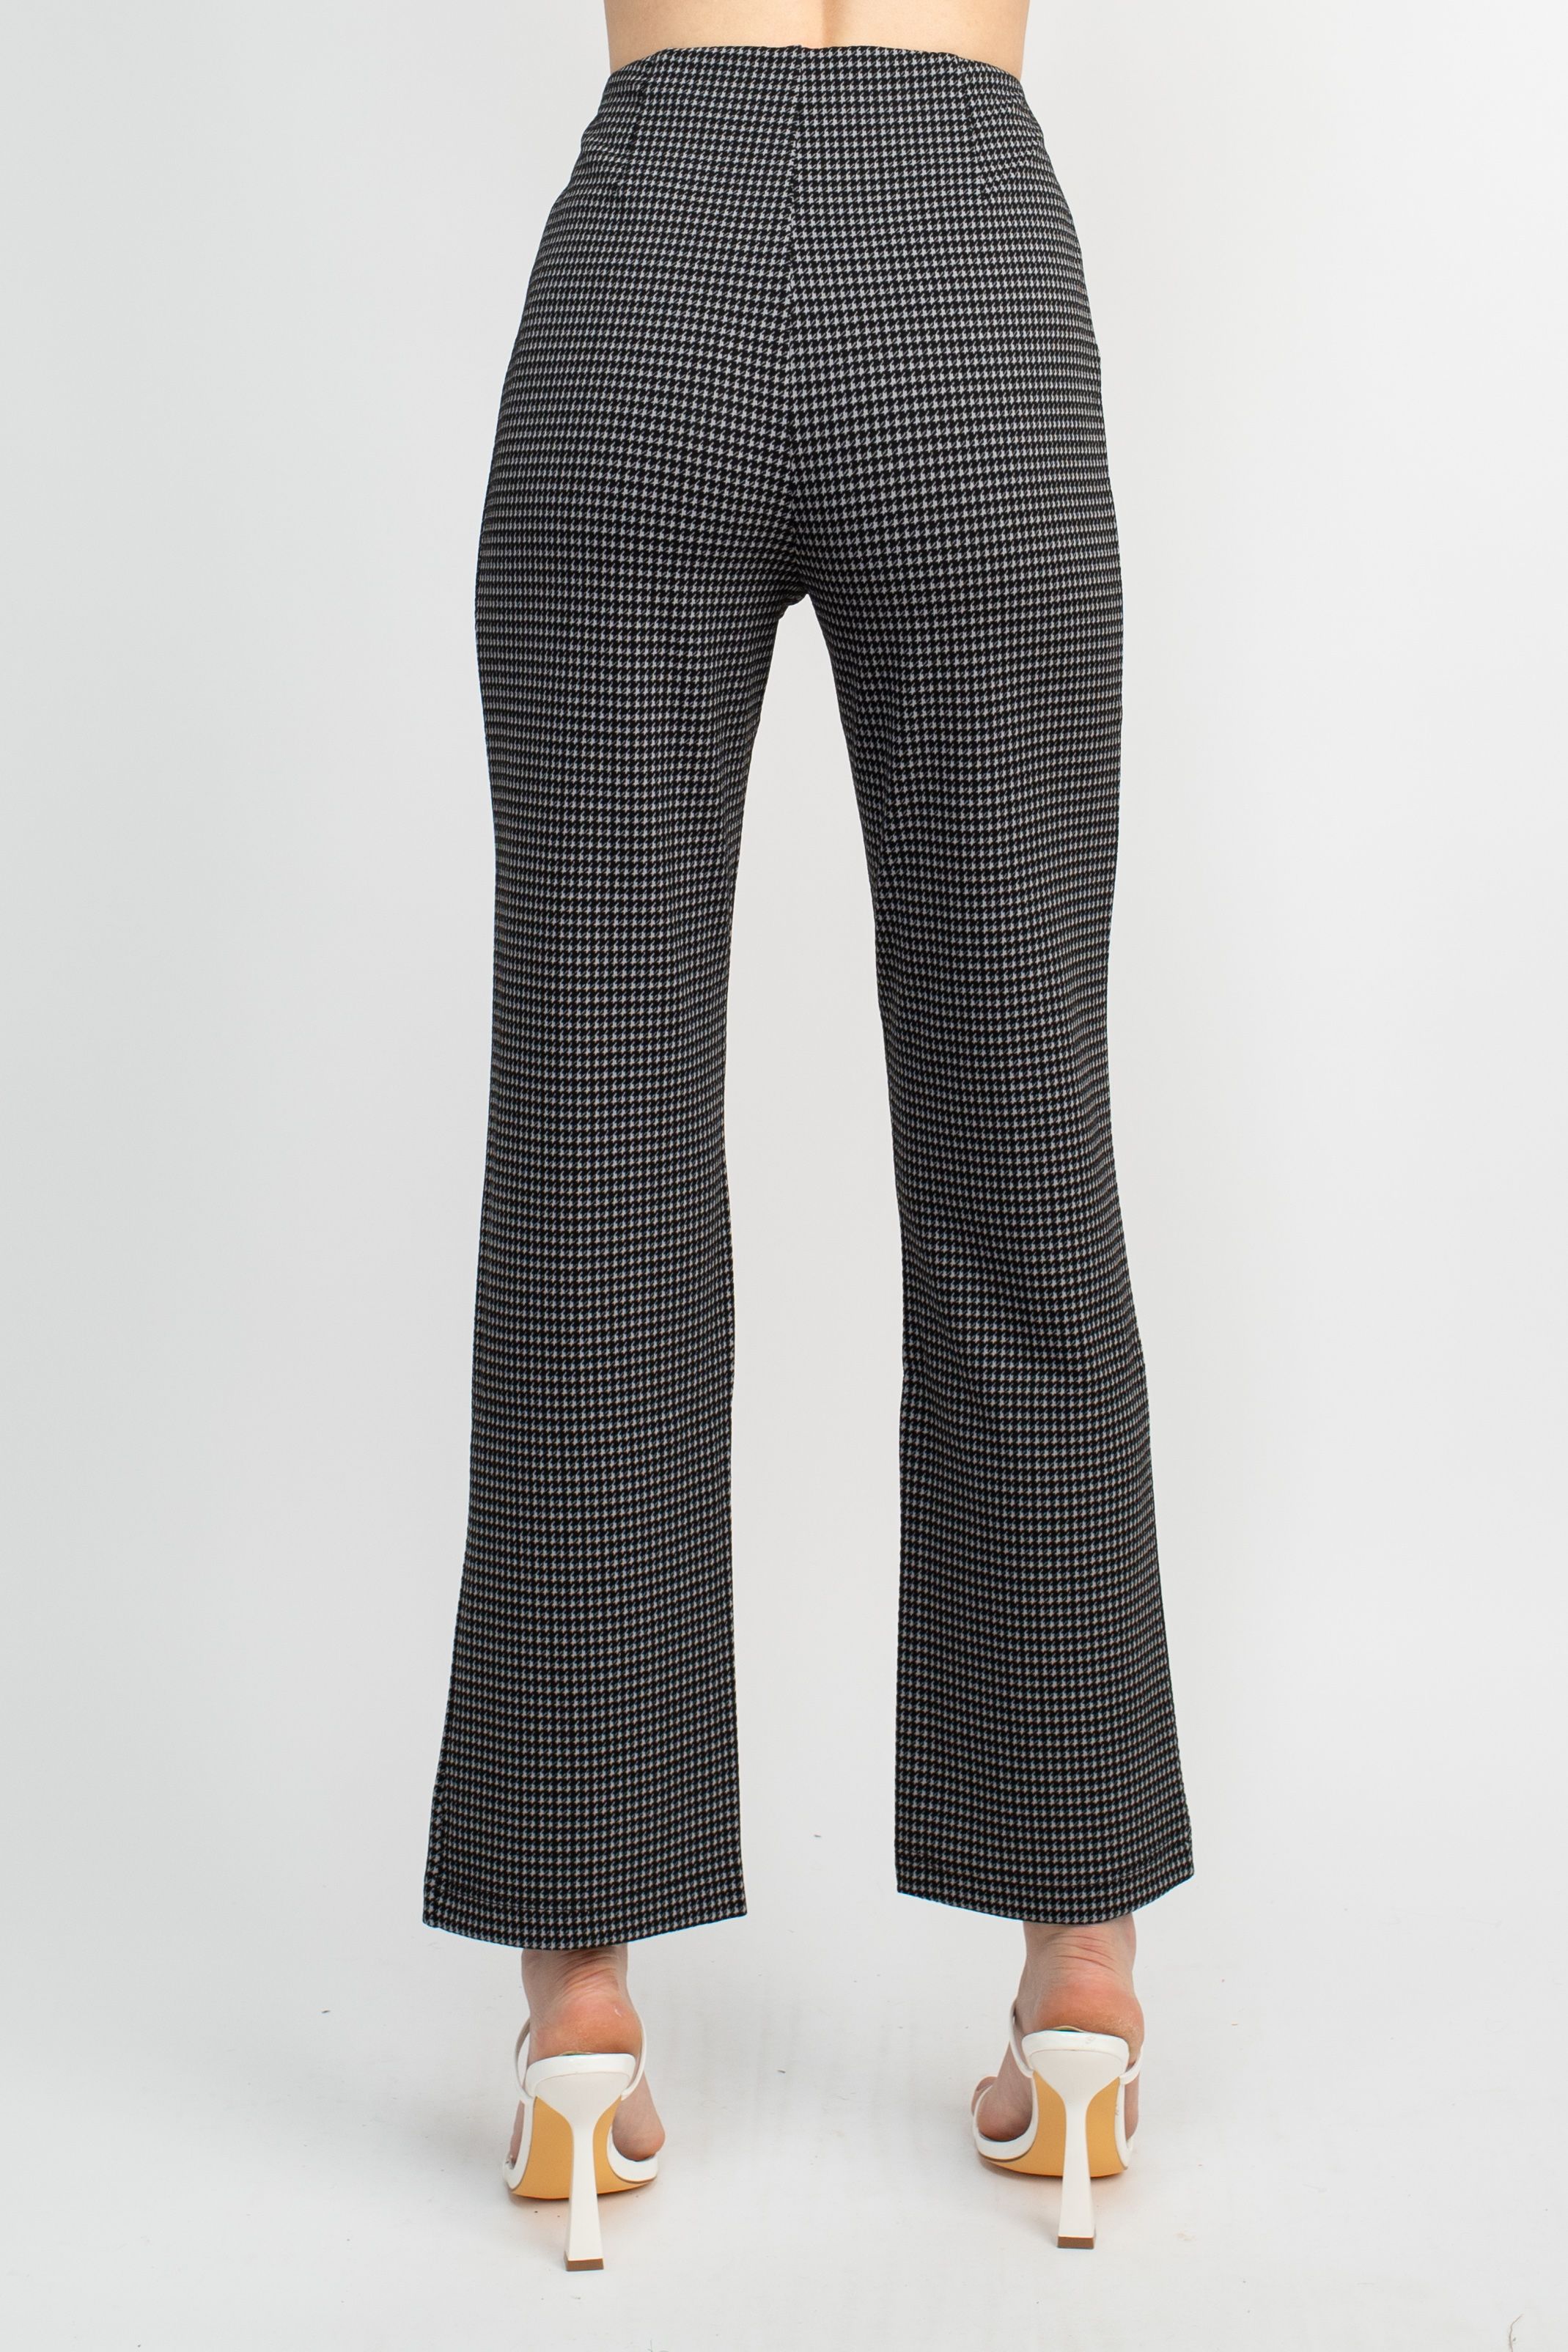 Joan Vass NY Viscose Blend Pull On Tummy Control Ankle Length Pants  WHOLESALE WOMEN'S APPAREL | WHOLESALE WOMENS APPAREL | WHOLESALE WOMEN'S  DRESSES | WHOLESALE WOMENS DRESSES | WHOLESALE WOMENS CLOTHING